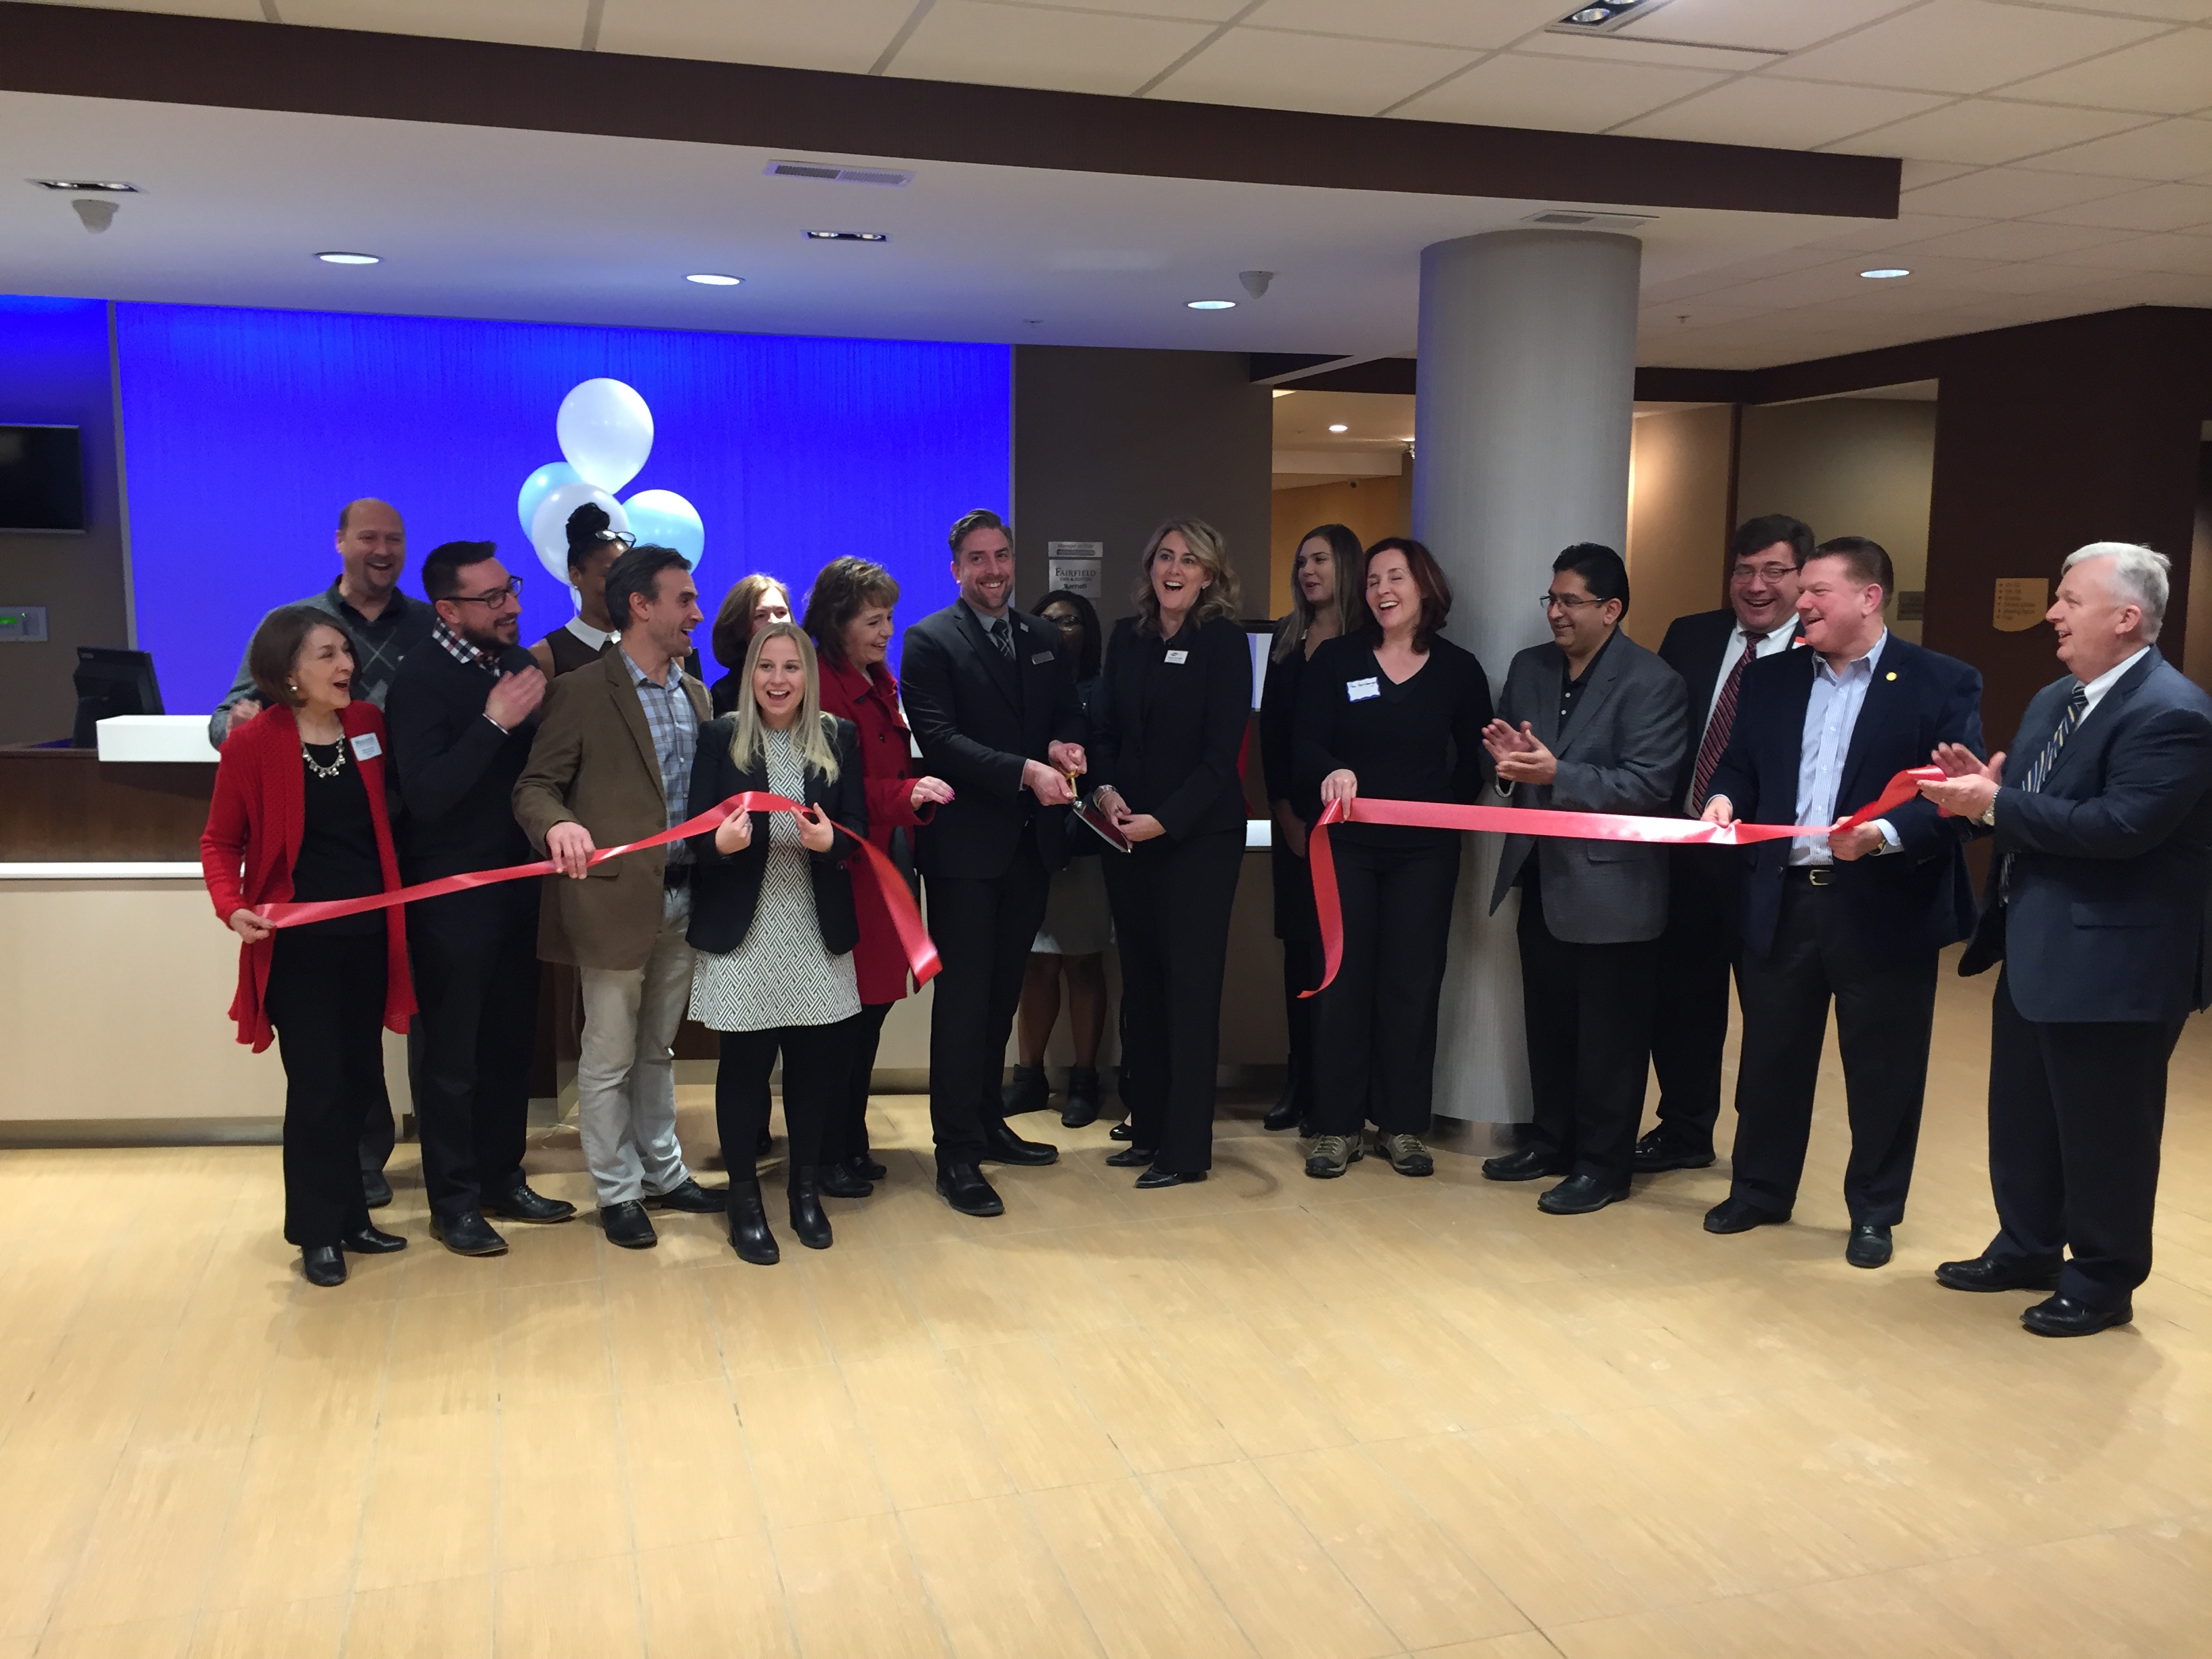 Ribbon Cutting Ceremony At the Fairfield Inn & Suites Detroit Chesterfield